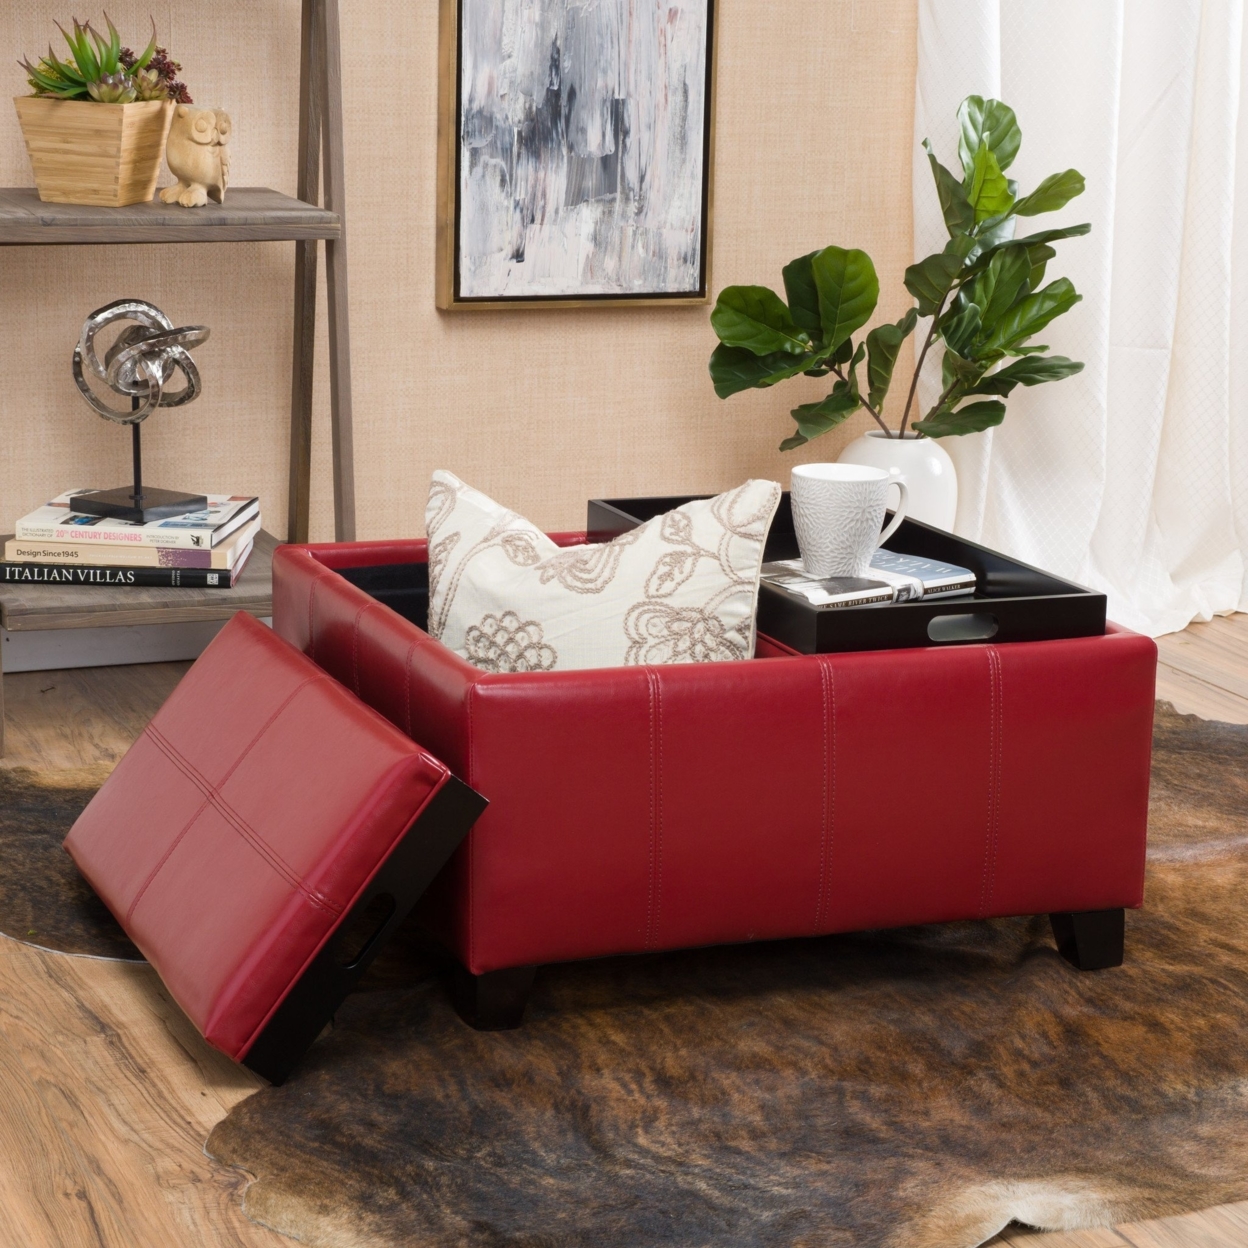 Justin 2-Tray-Top Red Ottoman Coffee Table With Storage